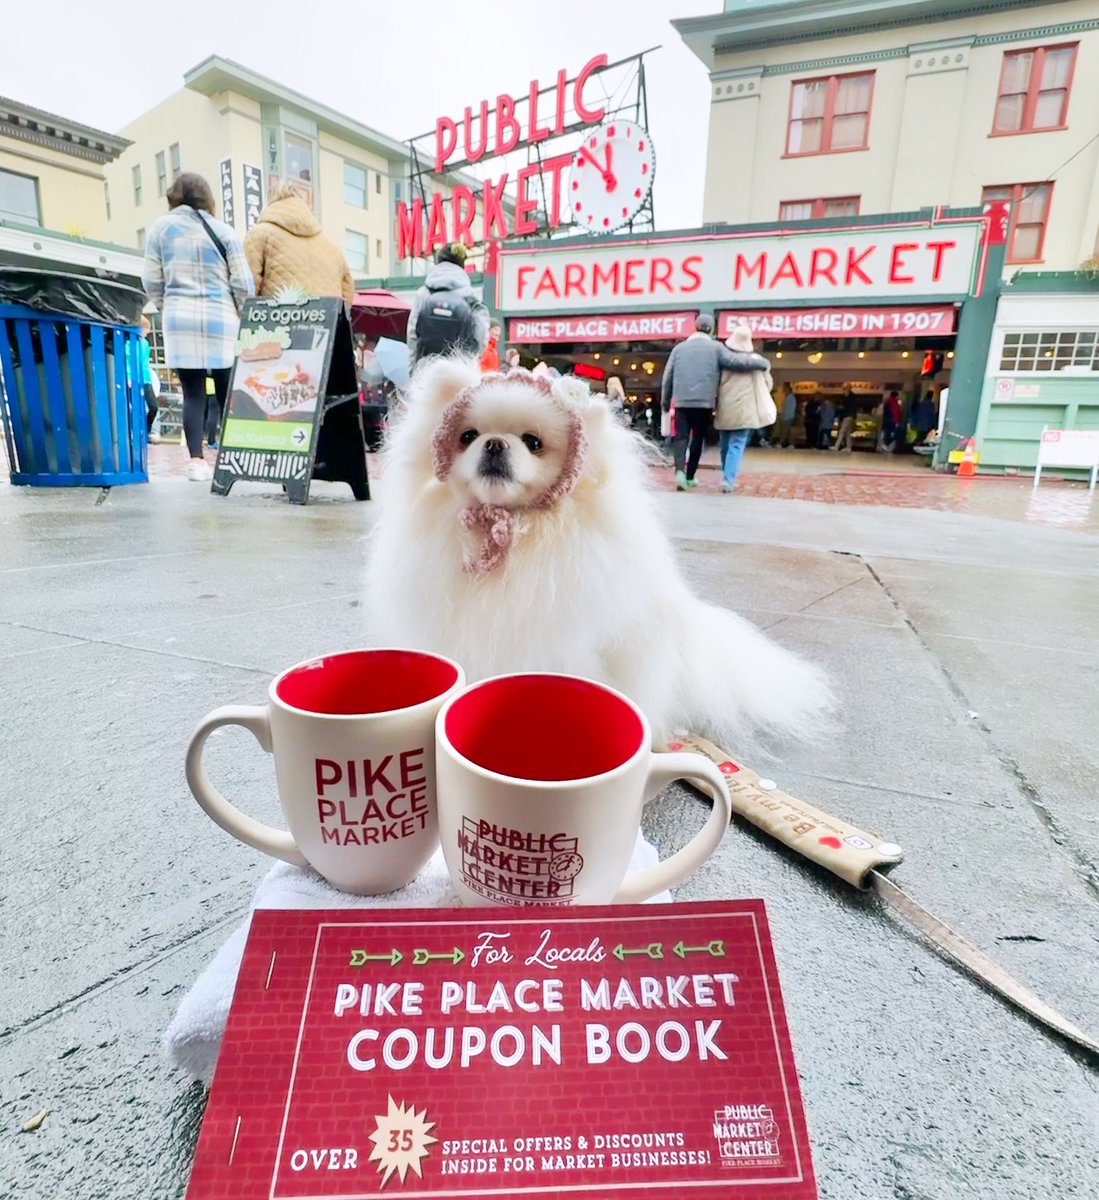 @pikeplacepublicmarket 
#pikeplacemarket #seattleevents #seattledogs #dogsofseattle #dogsofpnw #seattlepomeranians #pnwpomeranian #pomeraniansofseattle #pomeraniansofpnw #pomeranian #strawberryhat  #포메라니안 #ポメラニアン #パイクプレイスマーケット #シアトル #いちご帽子